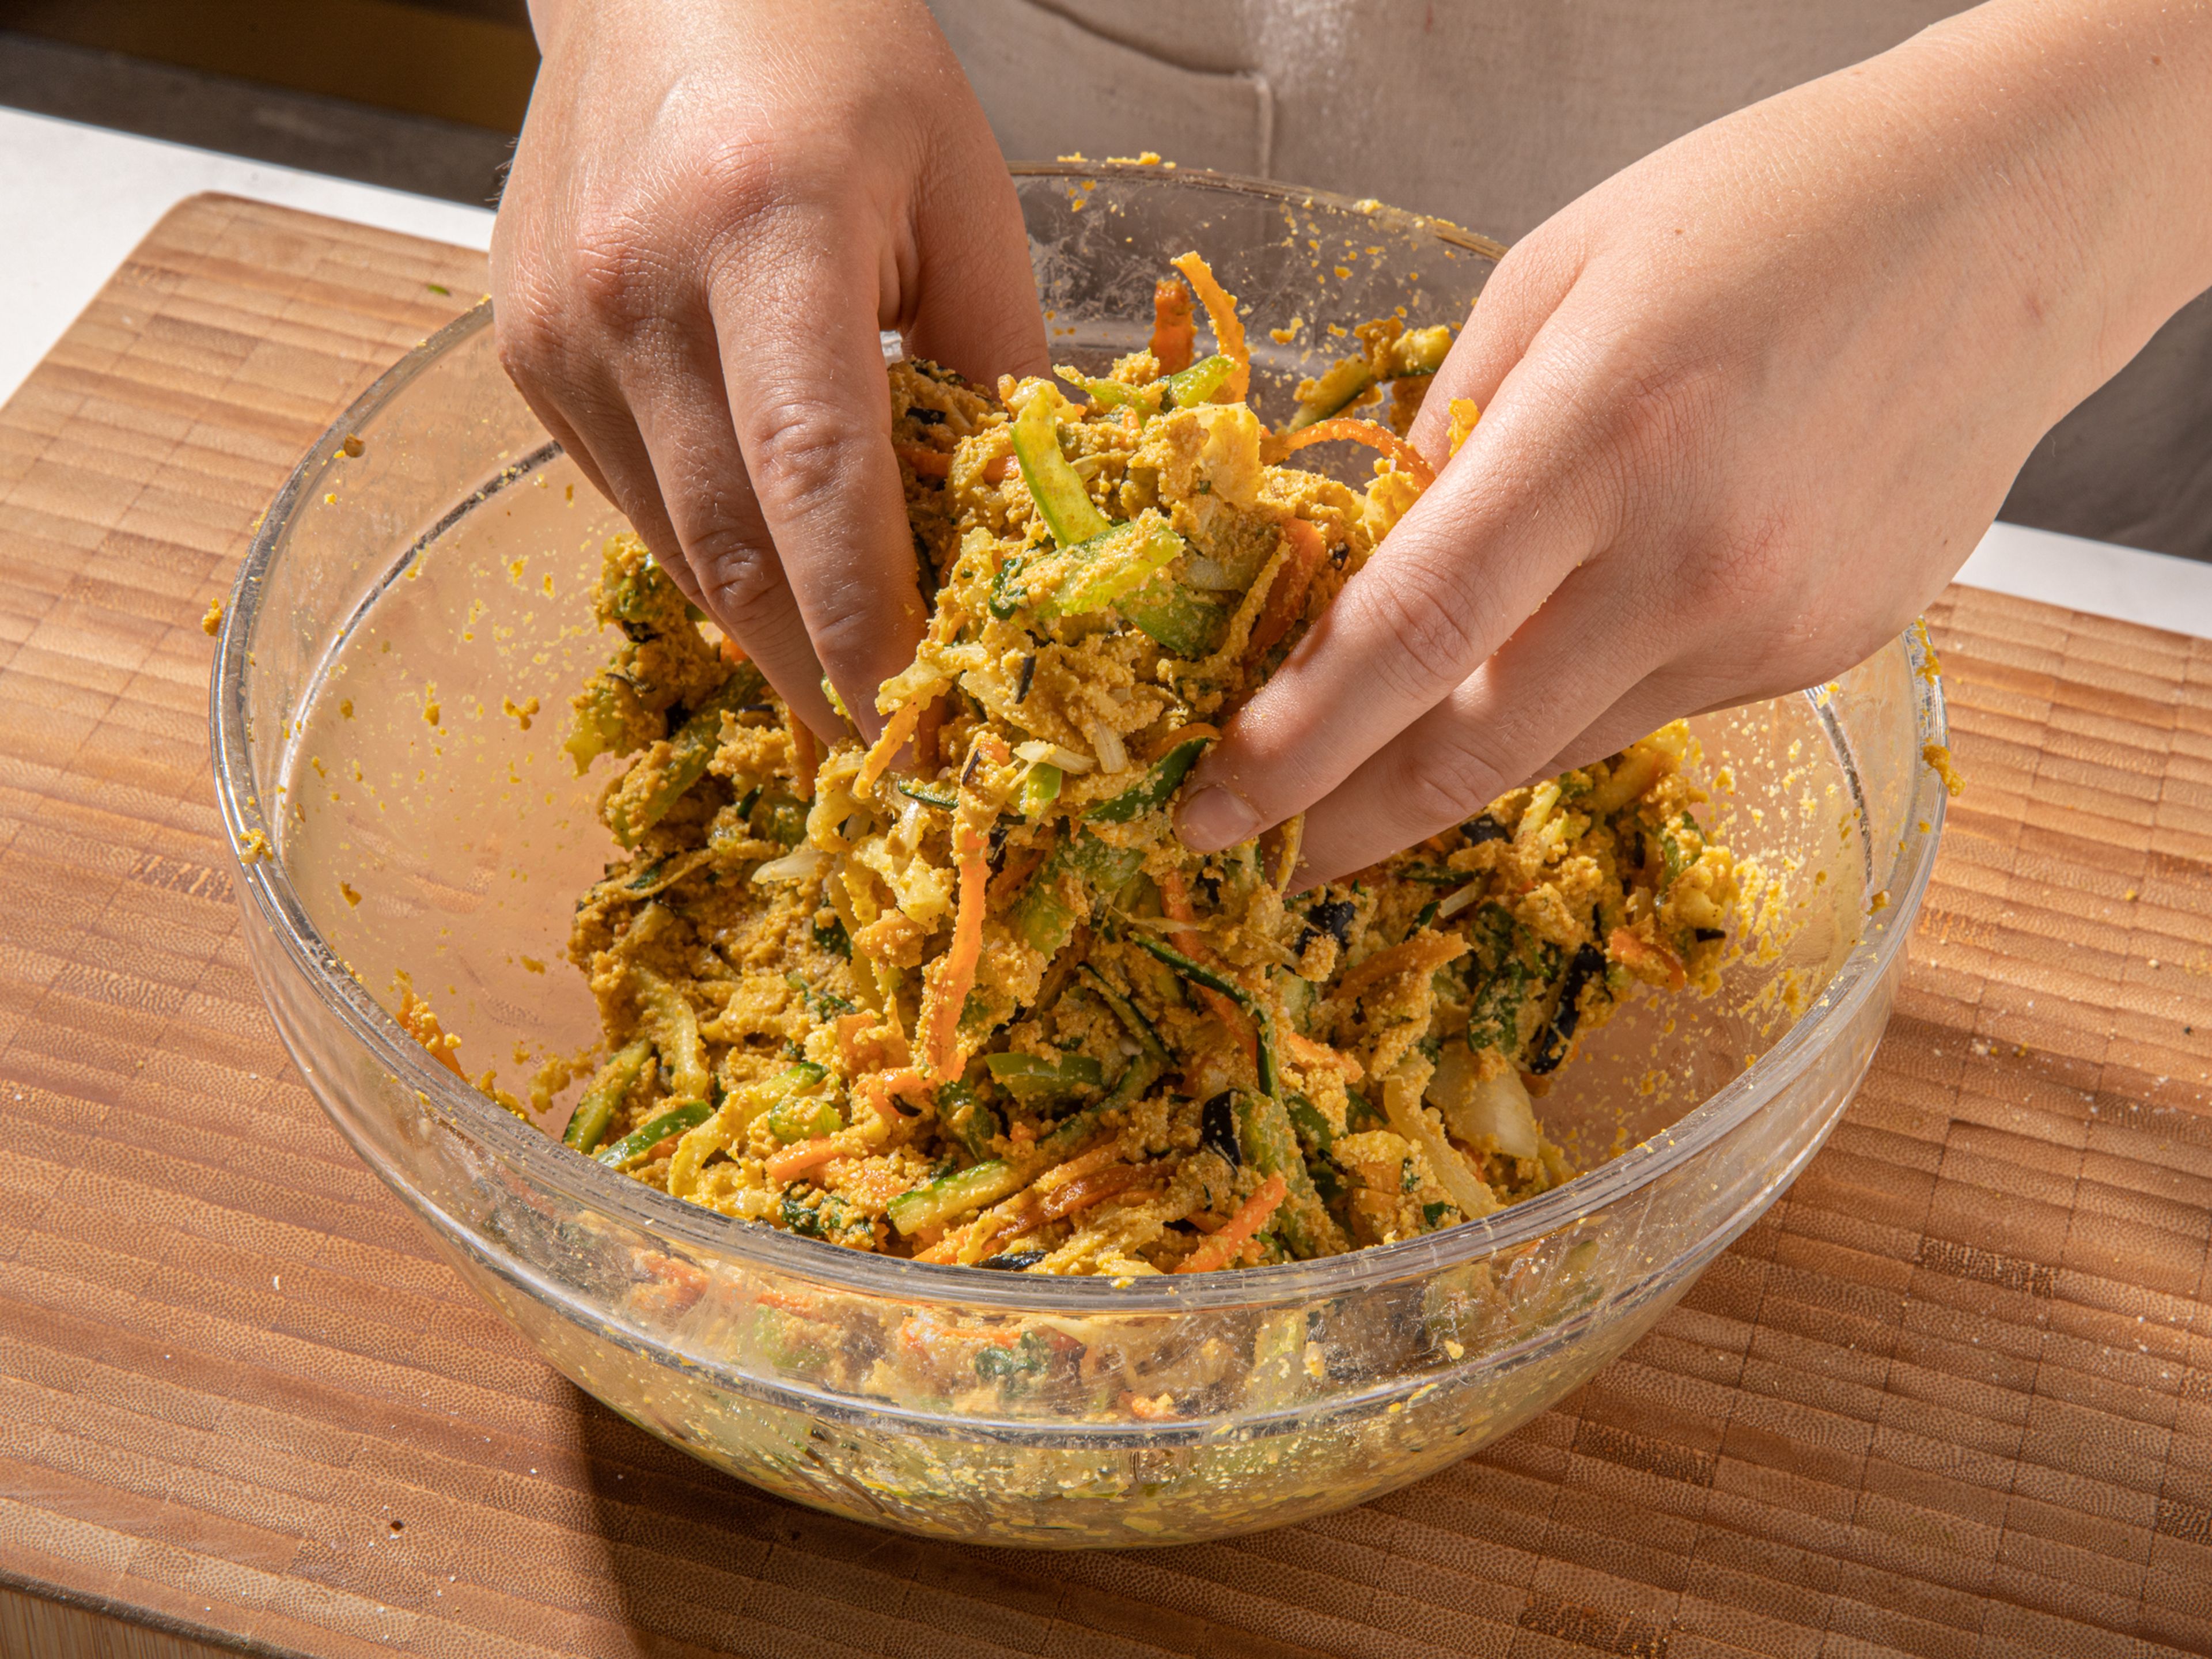 Use your hands to mix the vegetable mixture together and squeeze out some moisture. Let sit for 5 minutes, to extract the moisture out. Add rice flour, and if needed, a little water to form a batter that sticks together, but isn’t runny.